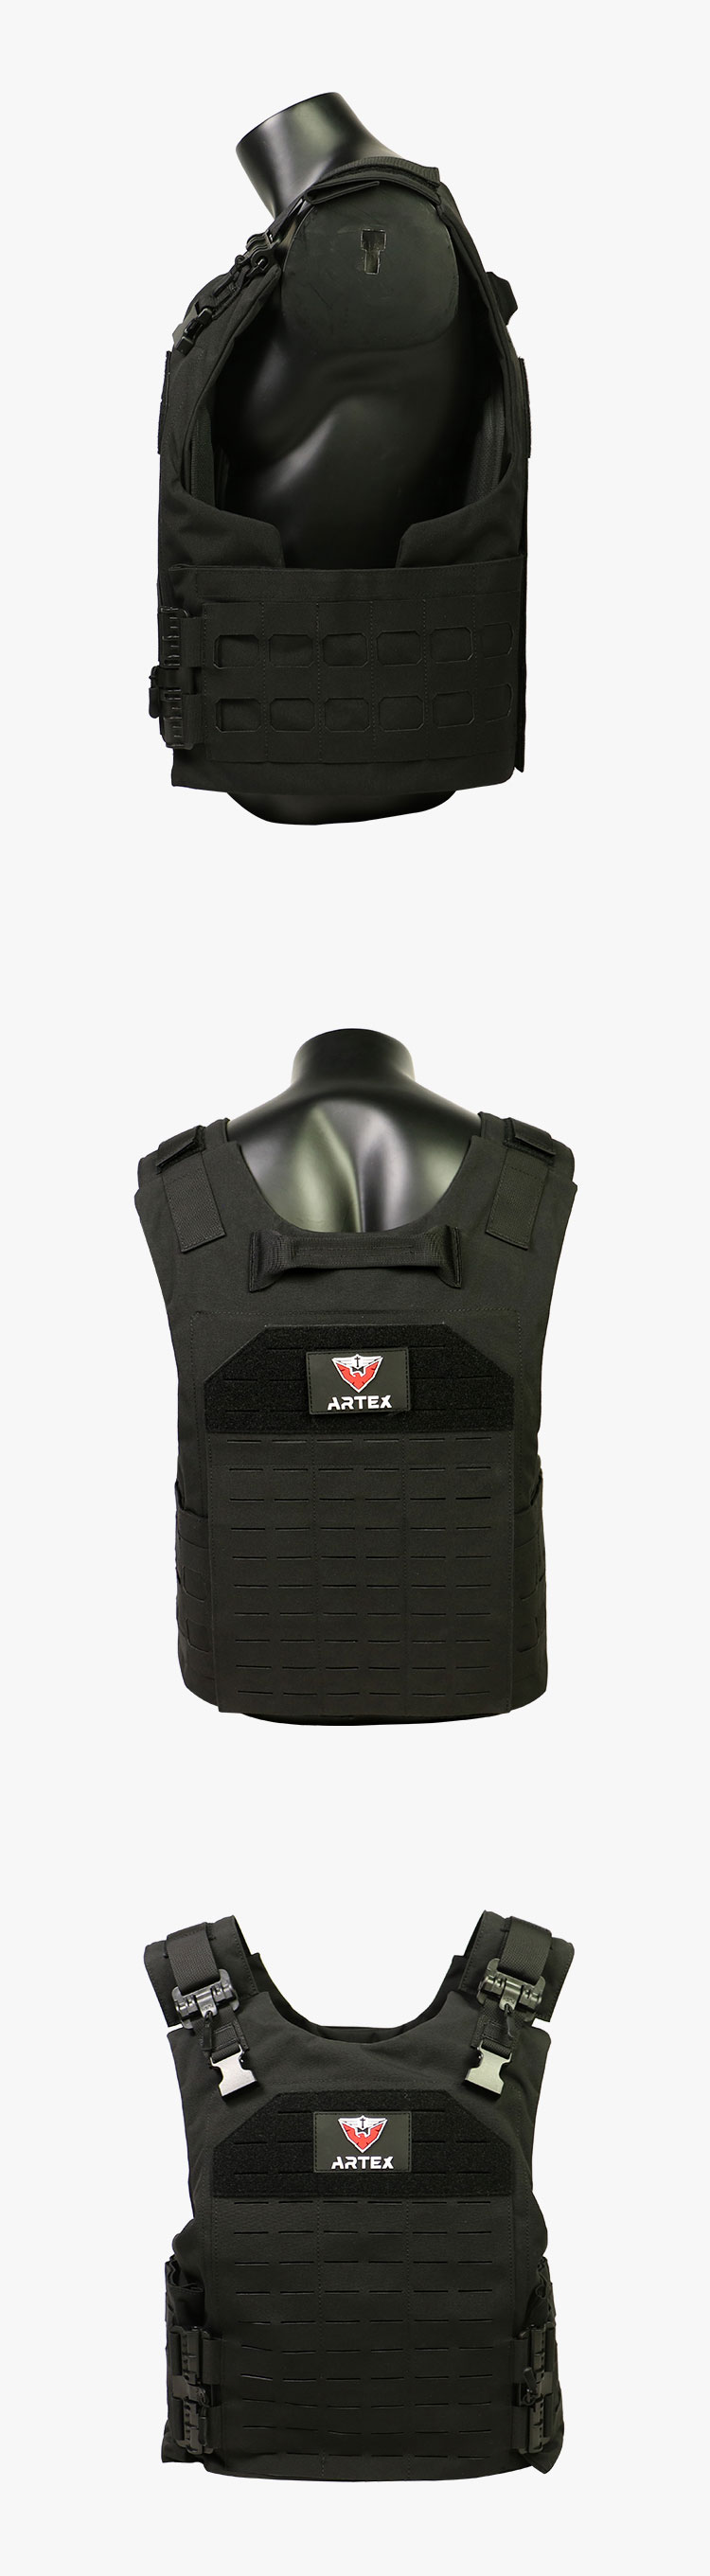 Military Soldiers Armored Vests